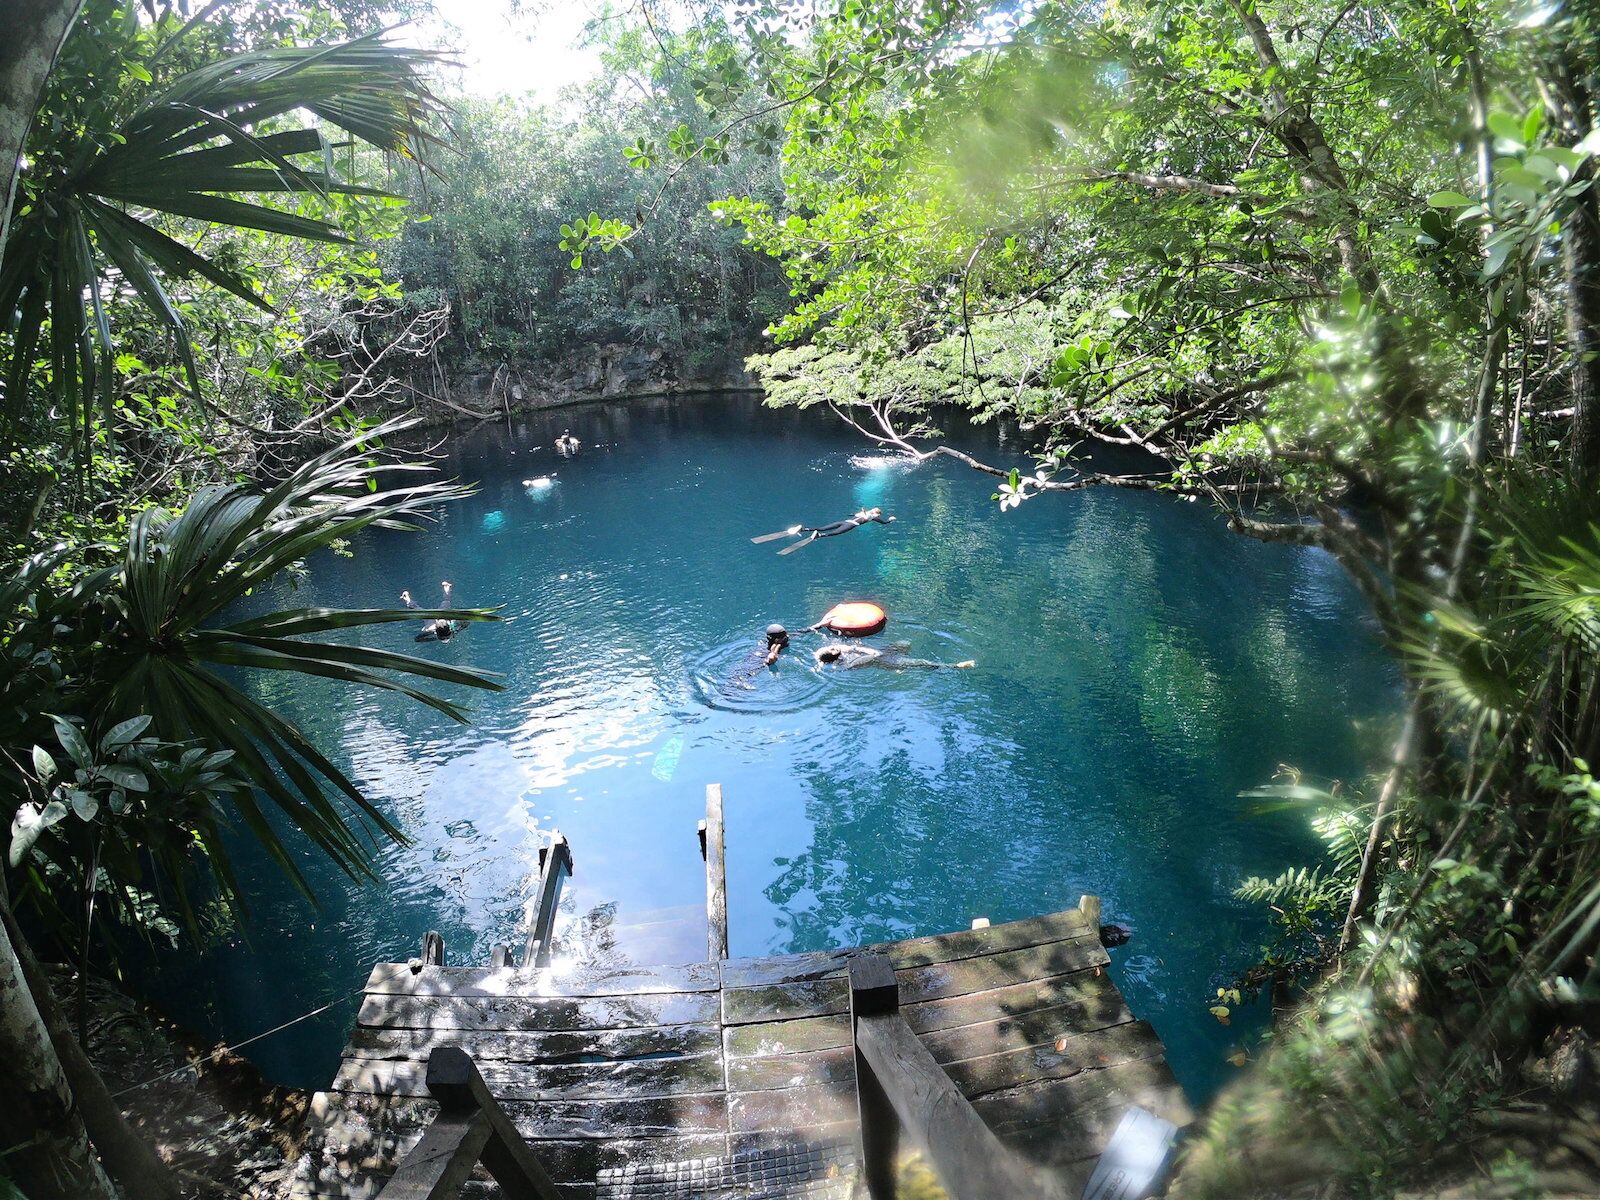 What is freediving if not a chance to check out awesome cenotes like this one?